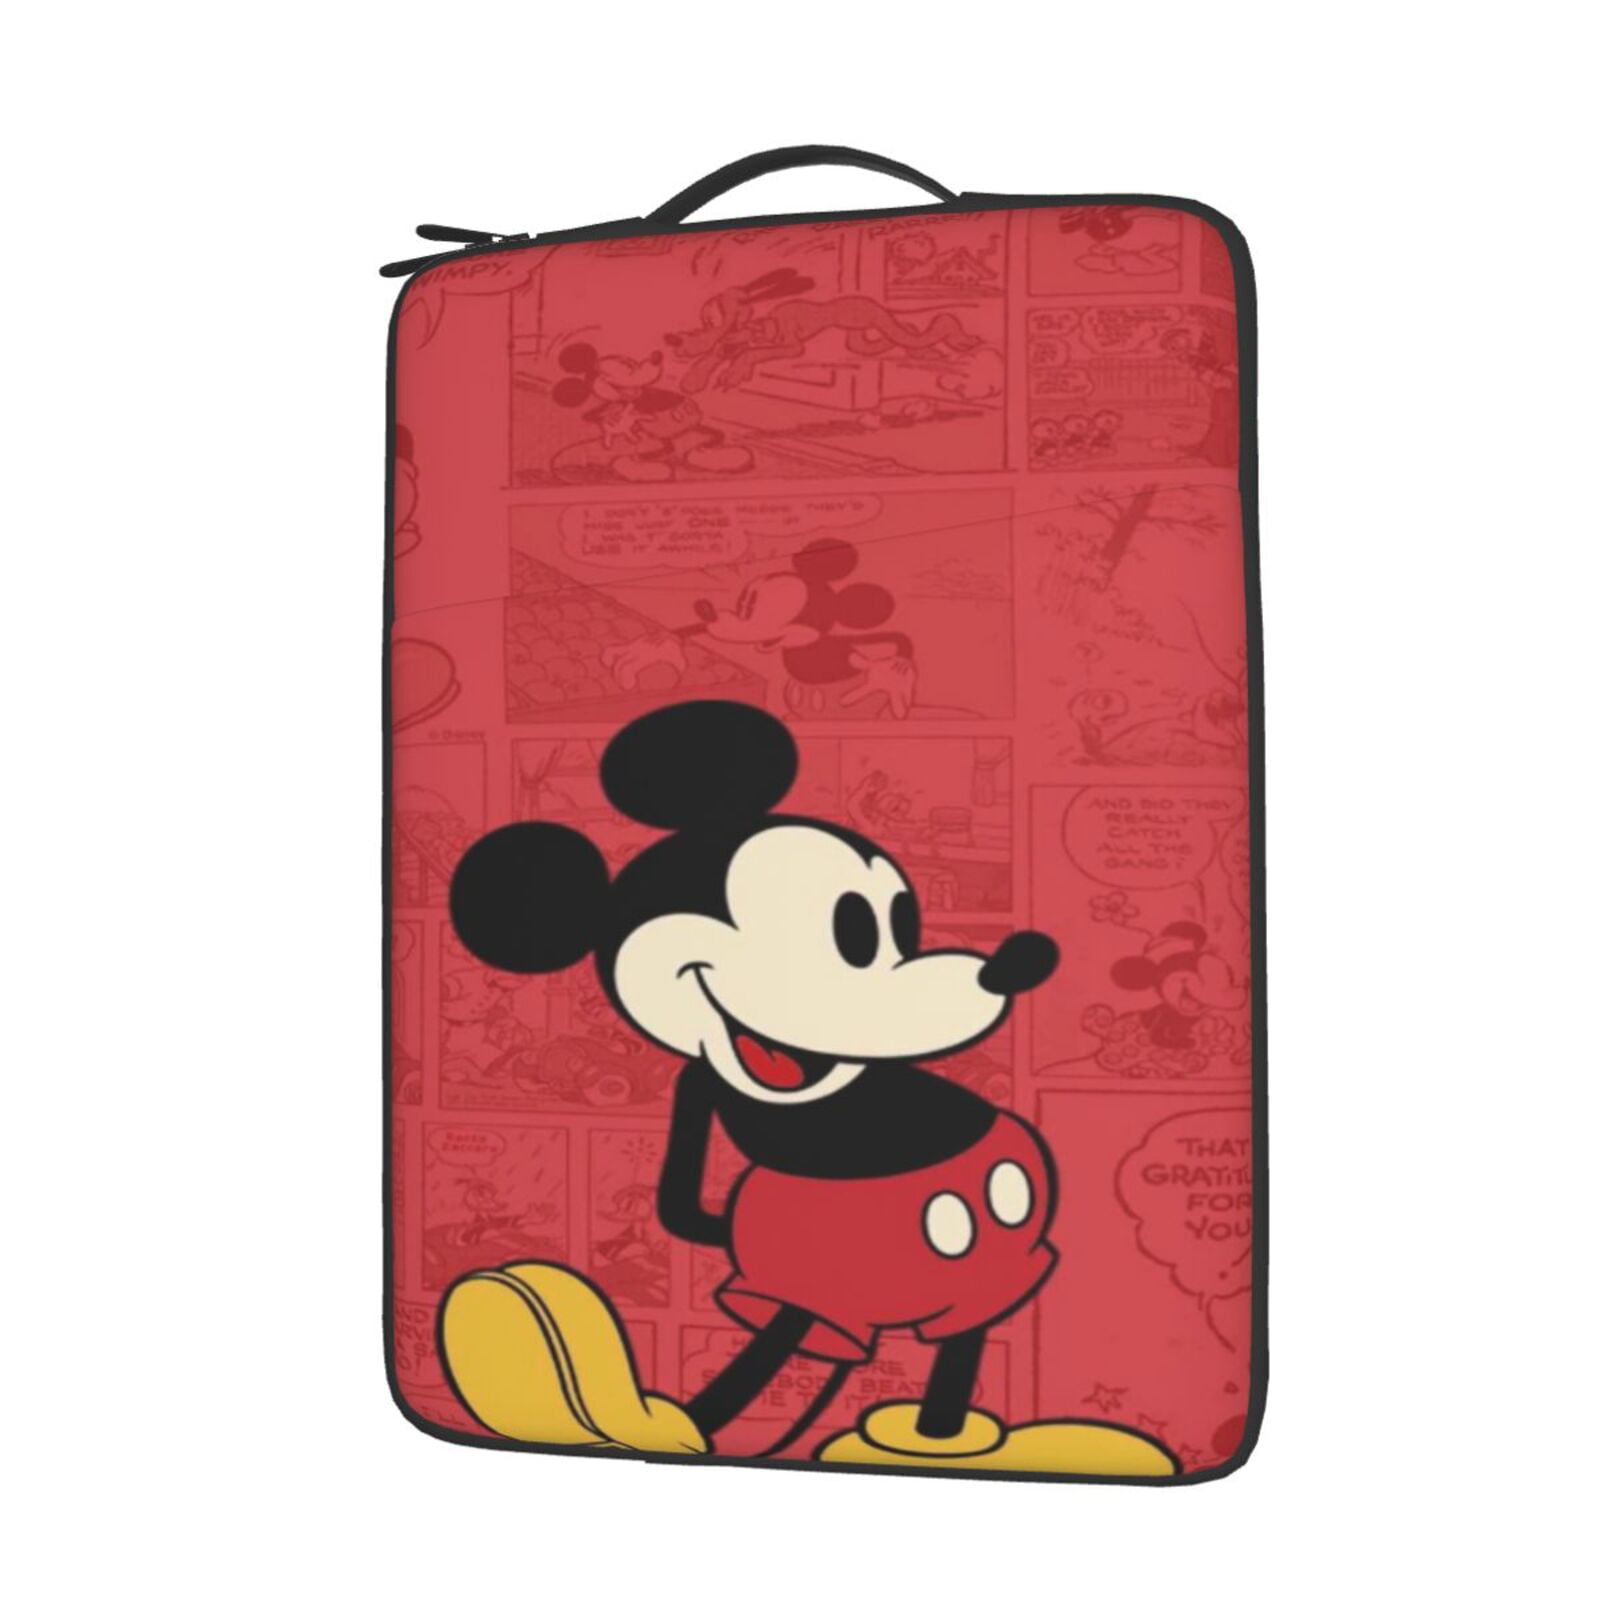 Waterproof Notebook Computer Bag-Light and Comfortable Tablet Briefcase-Band Zipper Portable Handbag 13 Inch Mickey-Mouse 13-Inch to 15-Inch Laptop Sleeve Case